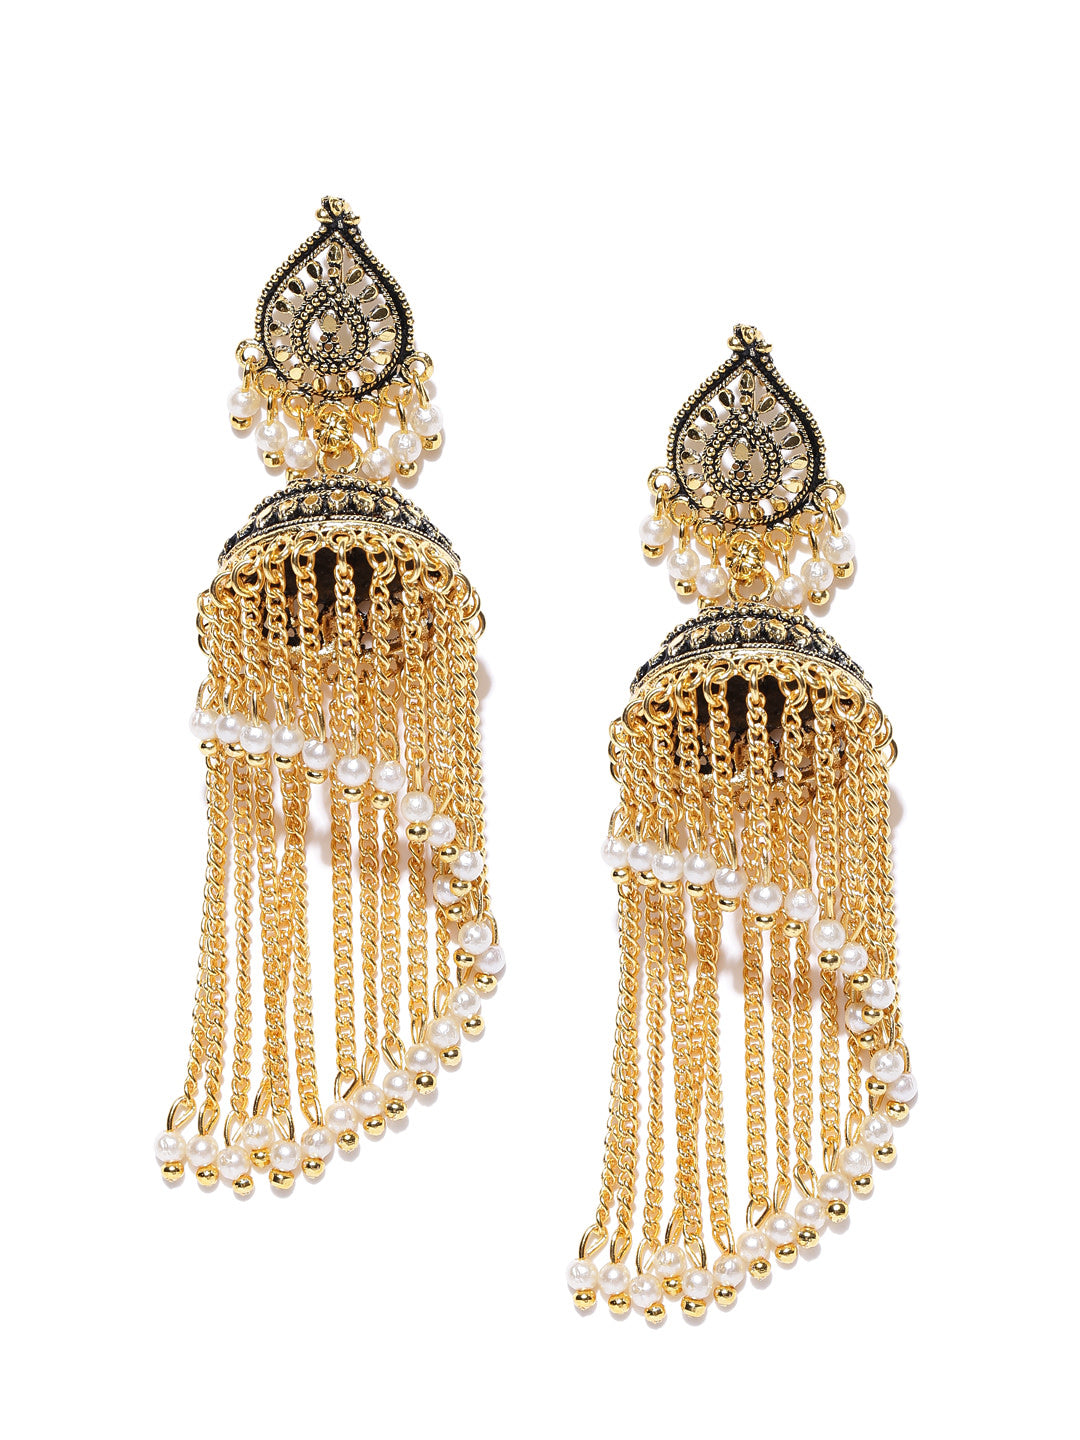 Buy Crunchy Fashion Bollywood Traditional Indian Wedding Ethnic Retro Big  Gold Jhumka With Black Beads Long Chain Tassel Hangers Earrings for  womengirls at Amazonin